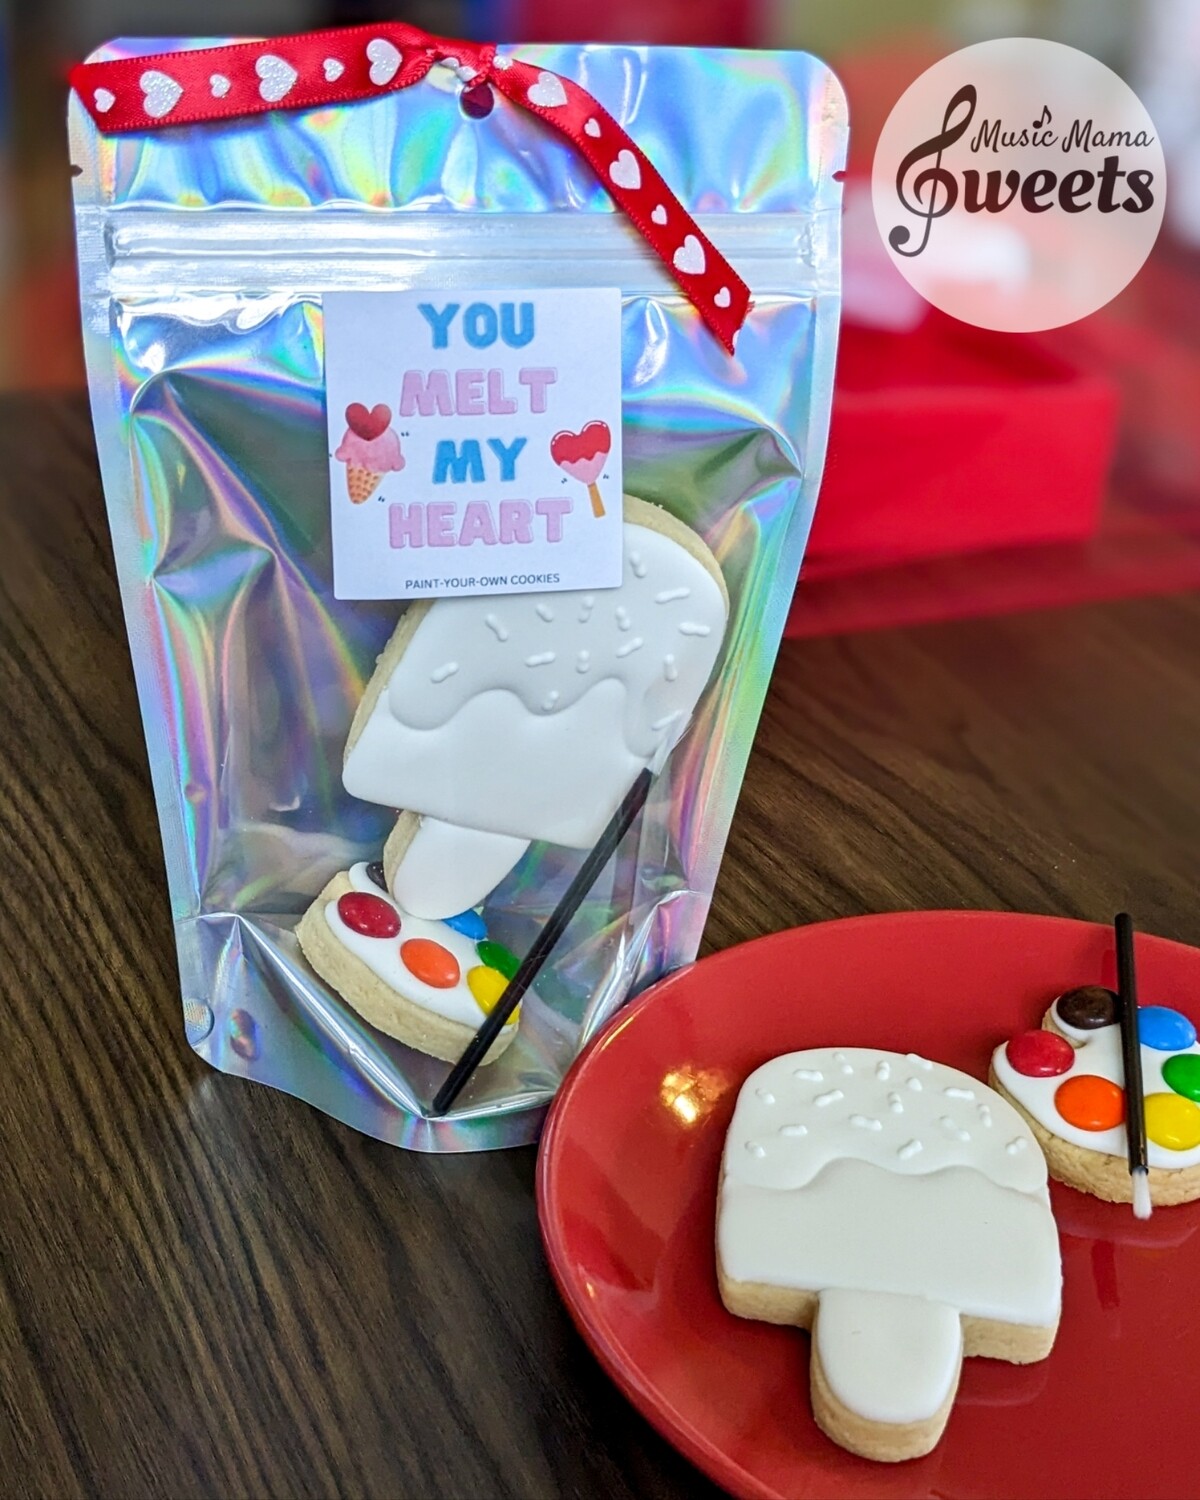 Paint-Your-Own Popsicle "You Melt My Heart"